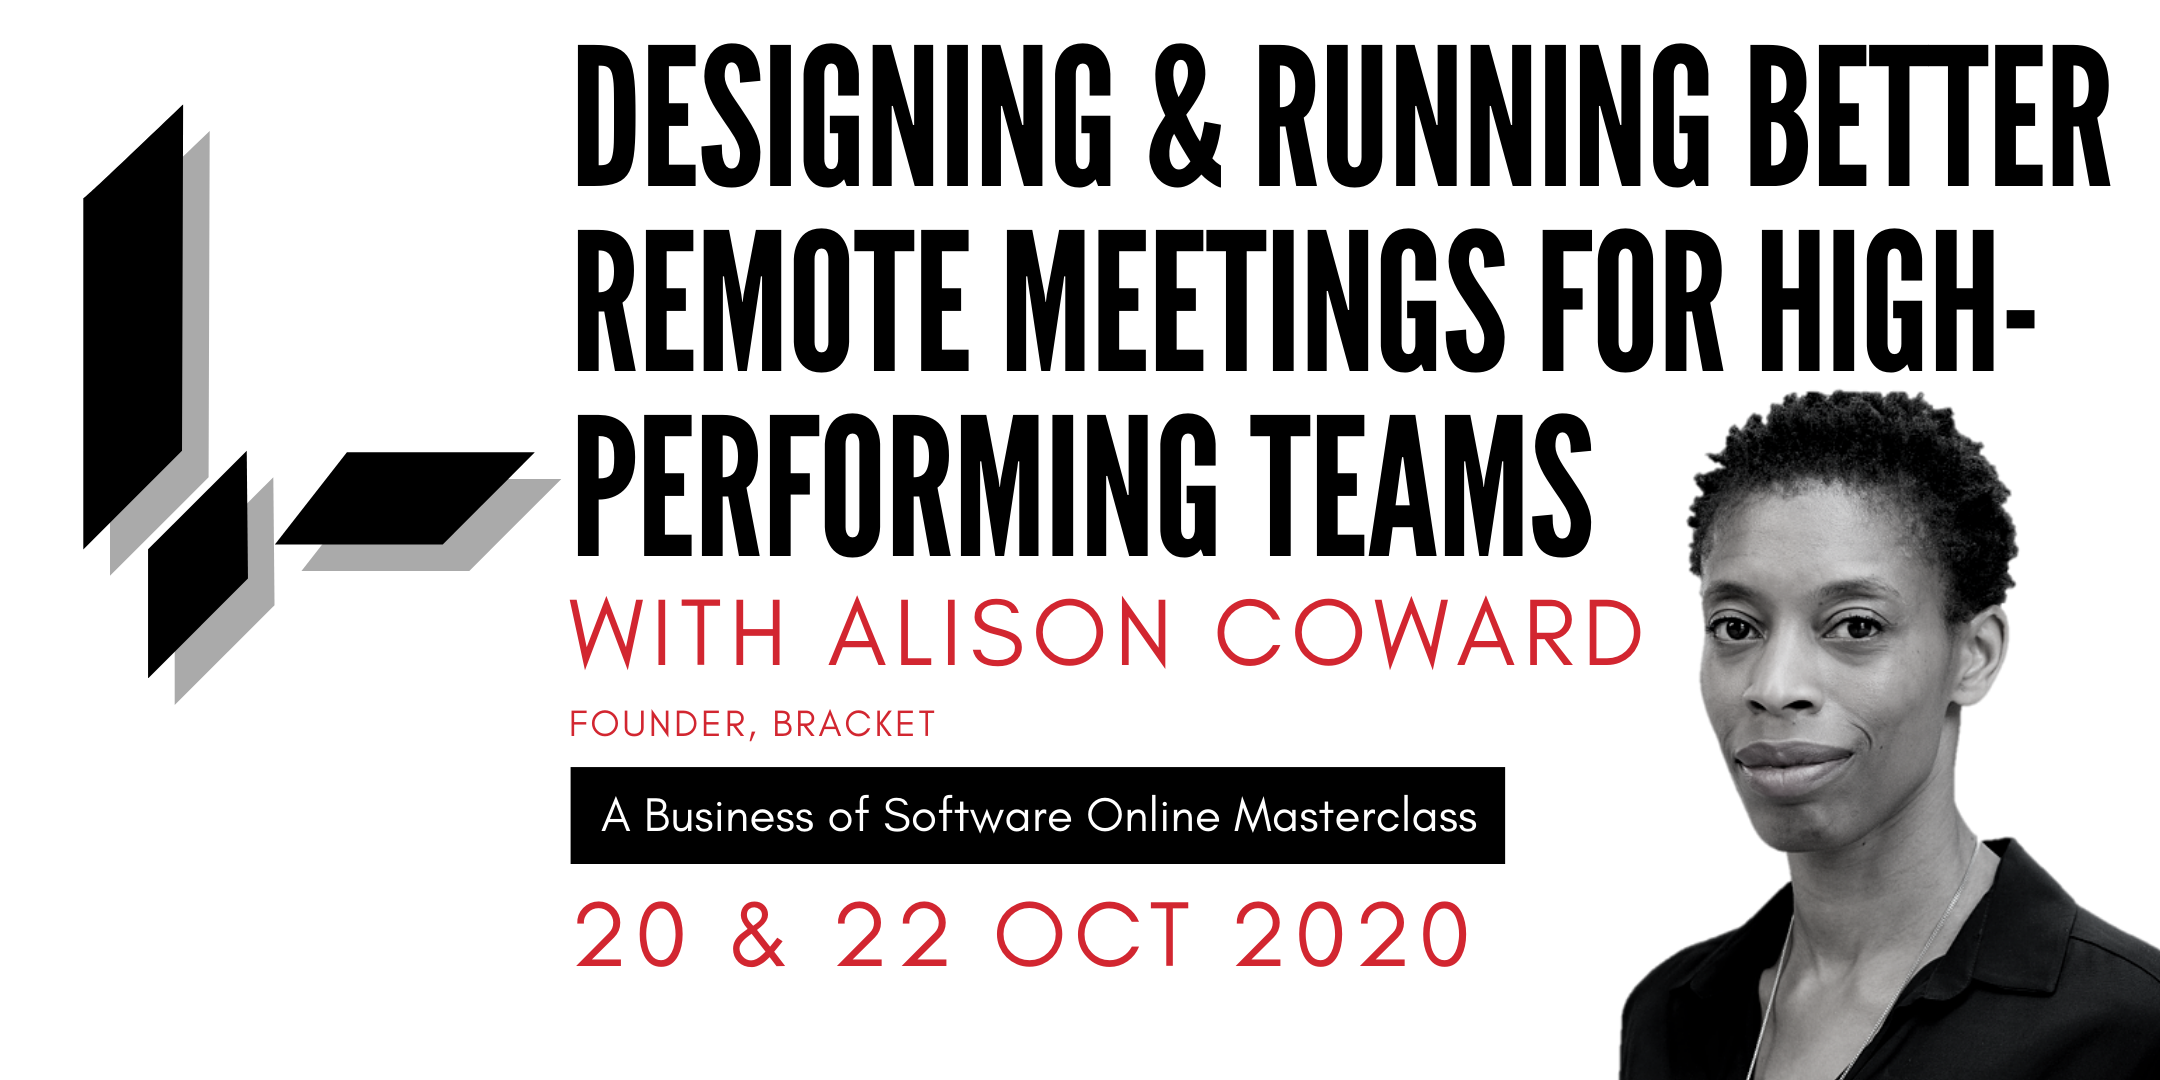 EB Alison Coward designing and run better remote meetings masterclass october 2020